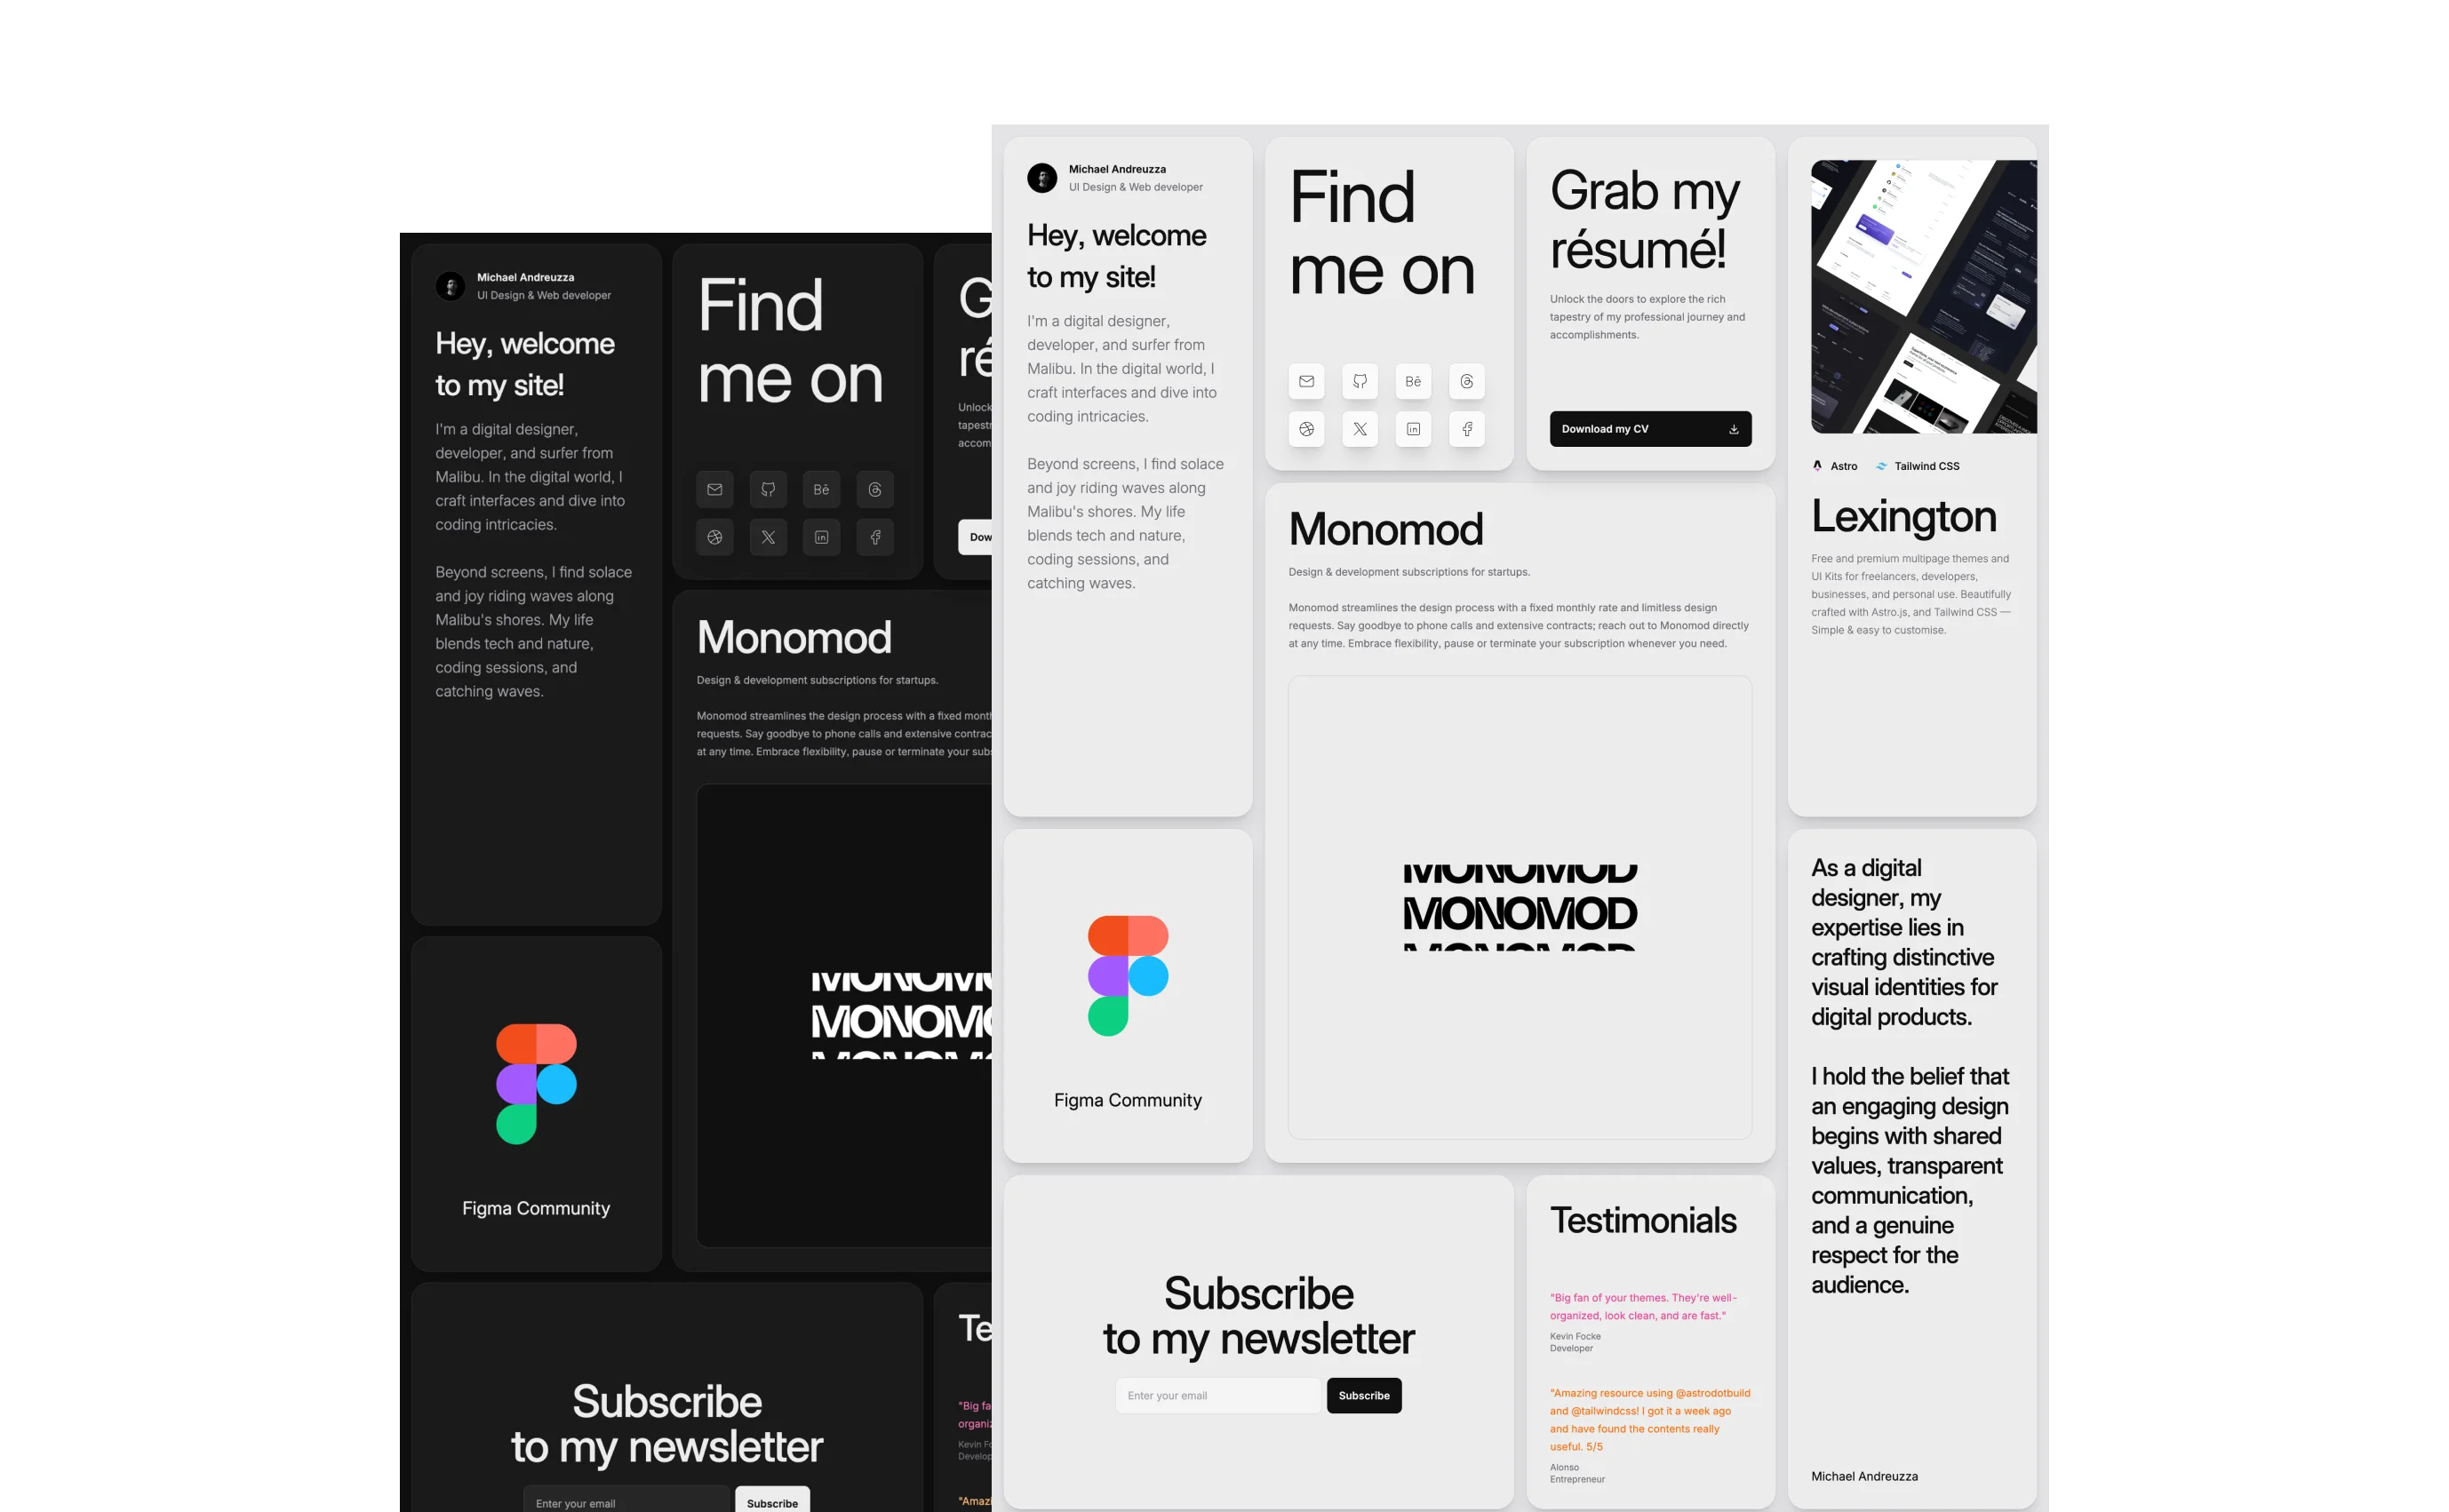 Prima Persona theme with a monochrome palette, showcasing a designer's personal website sections like 'Hey, welcome to my site,' 'Find me on' with social icons, 'Grab my résumé,' and an invitation to join the Figma community. Features include testimonials, newsletter subscription, and highlighted design services.